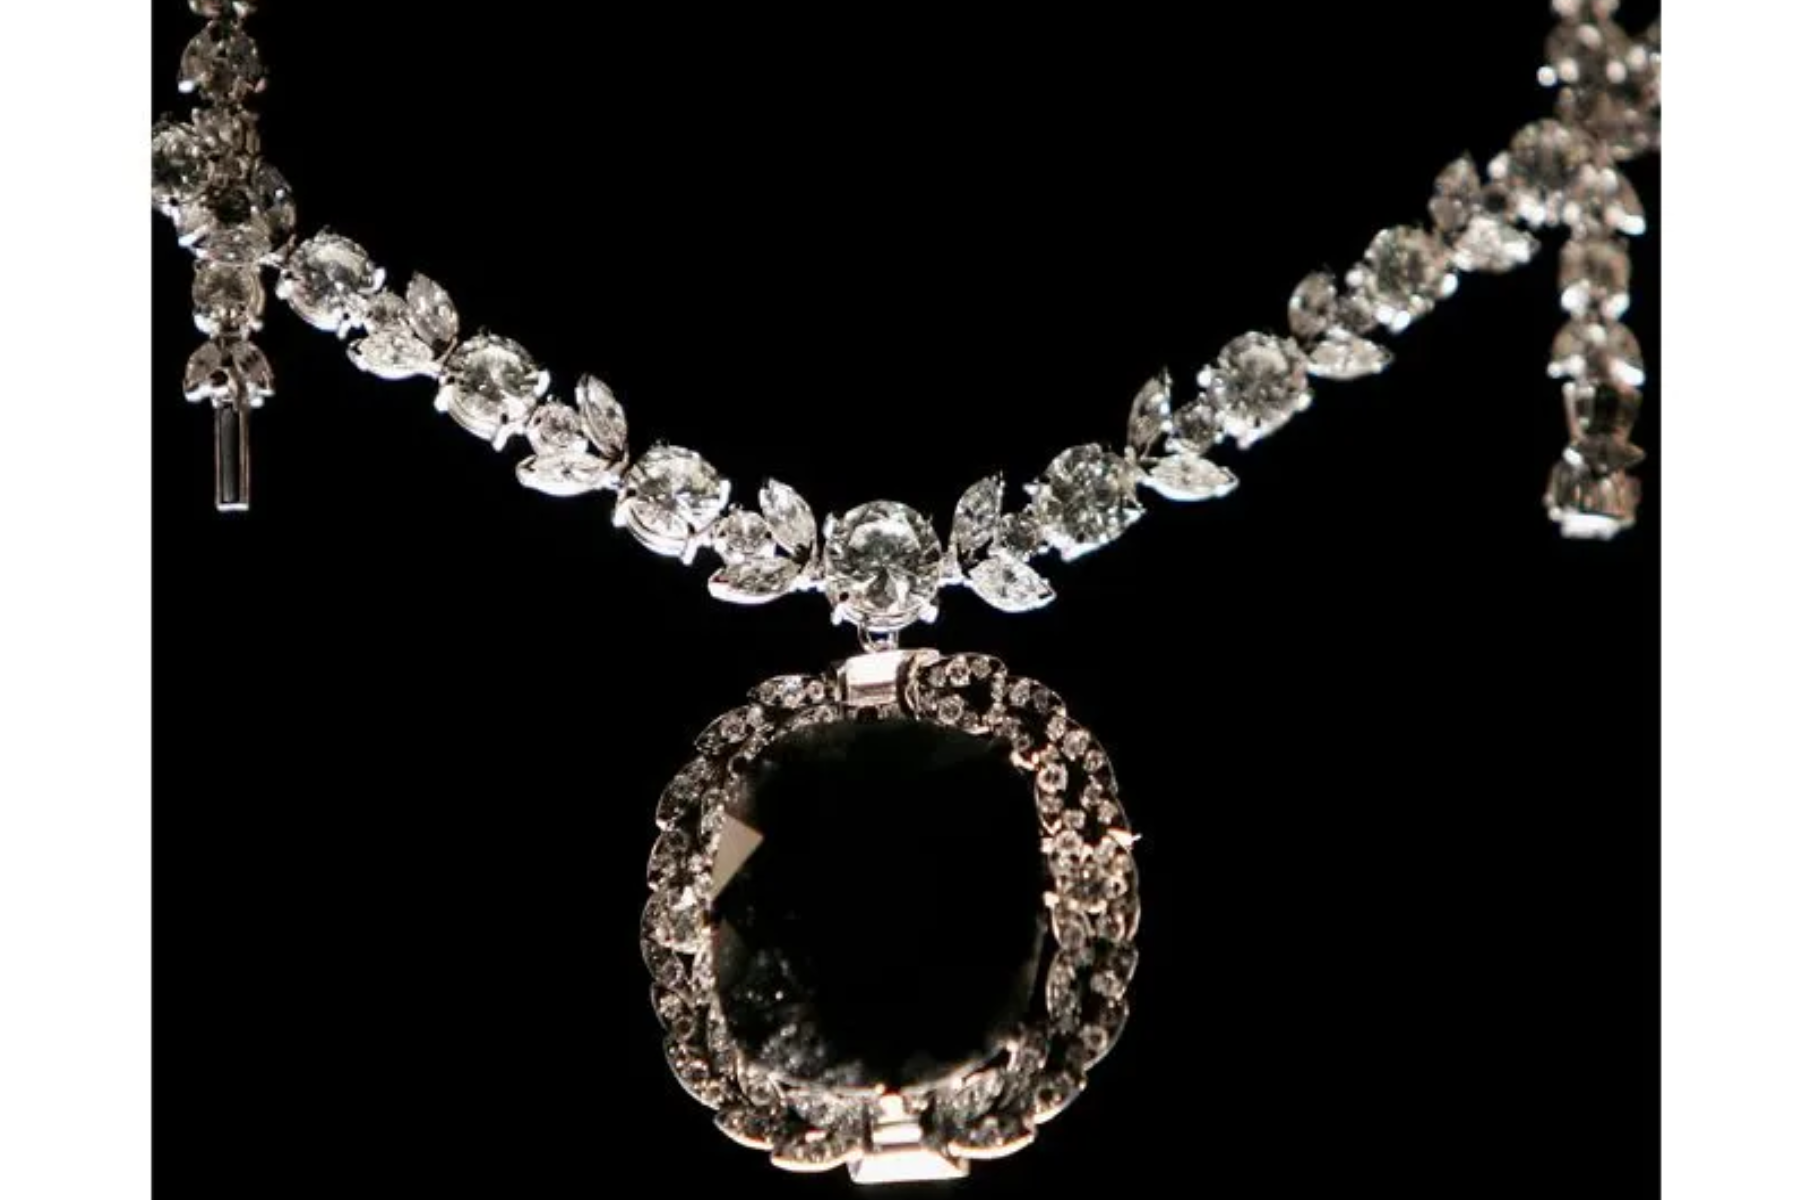 The Black Orlov Diamond was said to be "cursed" and to cause the deaths of whoever owned it